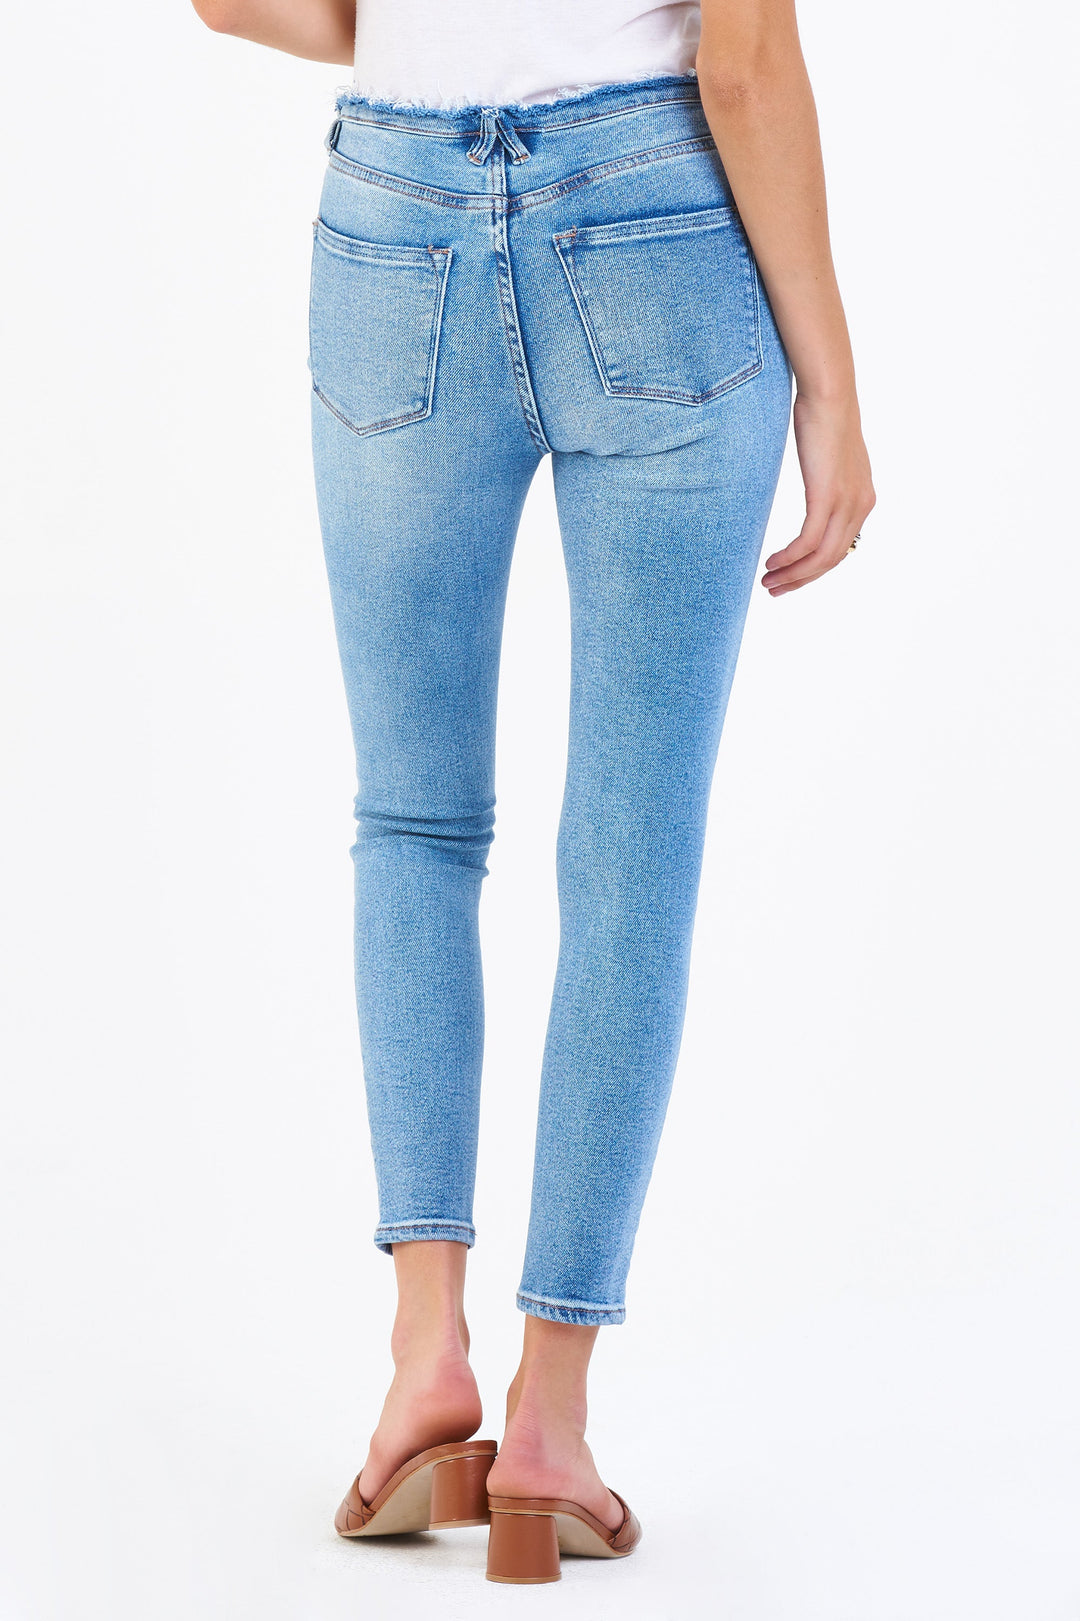 image of a female model wearing a OLIVIA SUPER HIGH RISE ANKLE SKINNY JEANS GALLANT JEANS